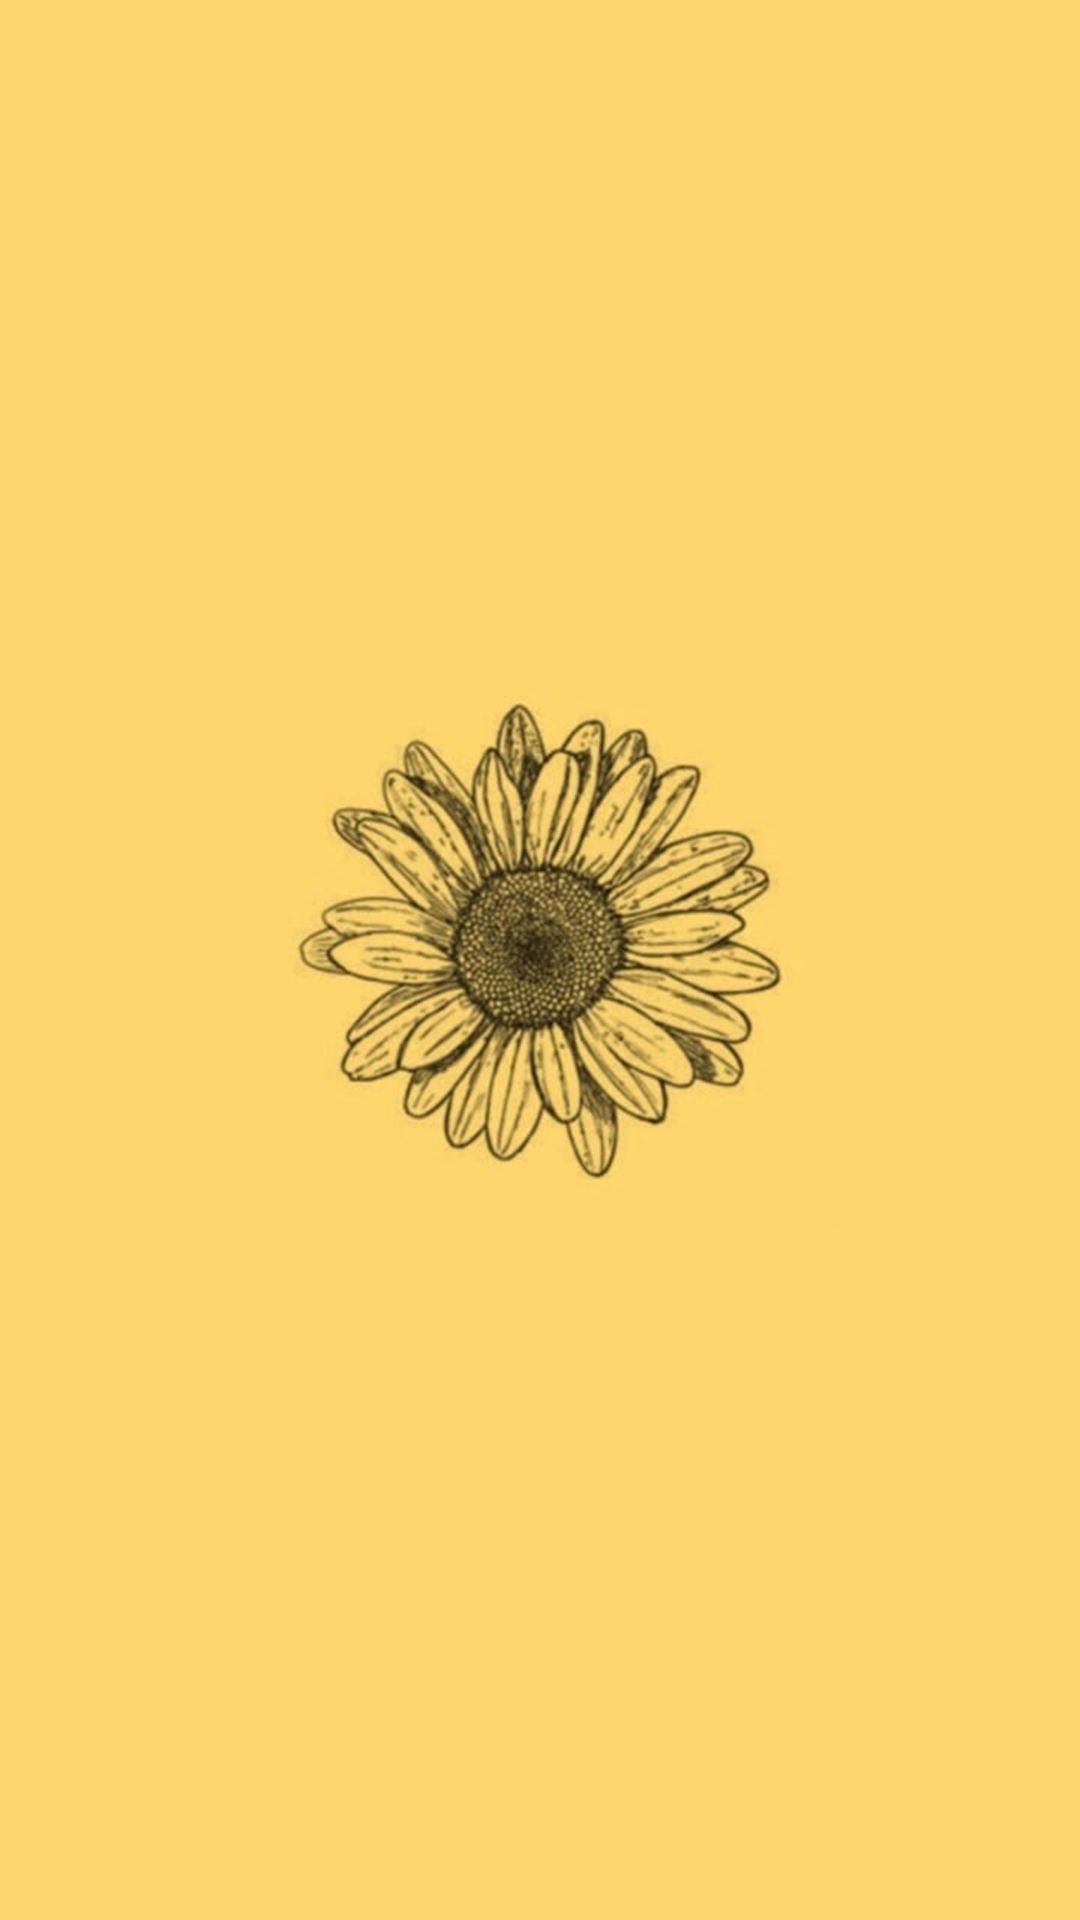 IPhone wallpaper of a sunflower on a yellow background - Sunflower